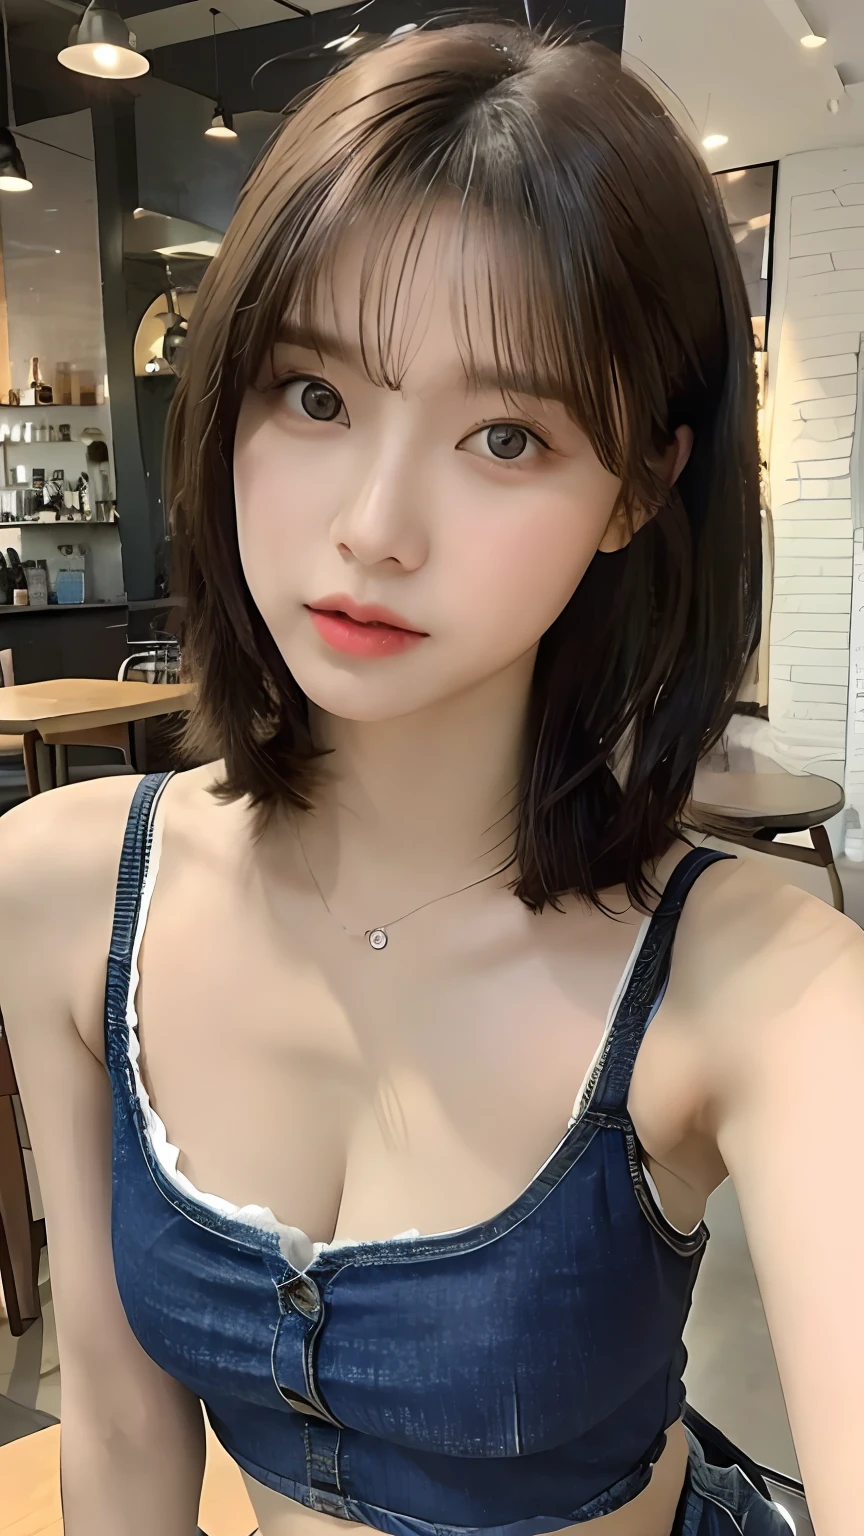 (realisitic、hight resolution:1.3)、1 girl with a perfect figure、Super thin face and eyes、length hair、Low Cut Tank Top:Short jeans、in a cafe、coffee on table、Colossal 、Exposed cleavage　Navel out　Bundle your hair